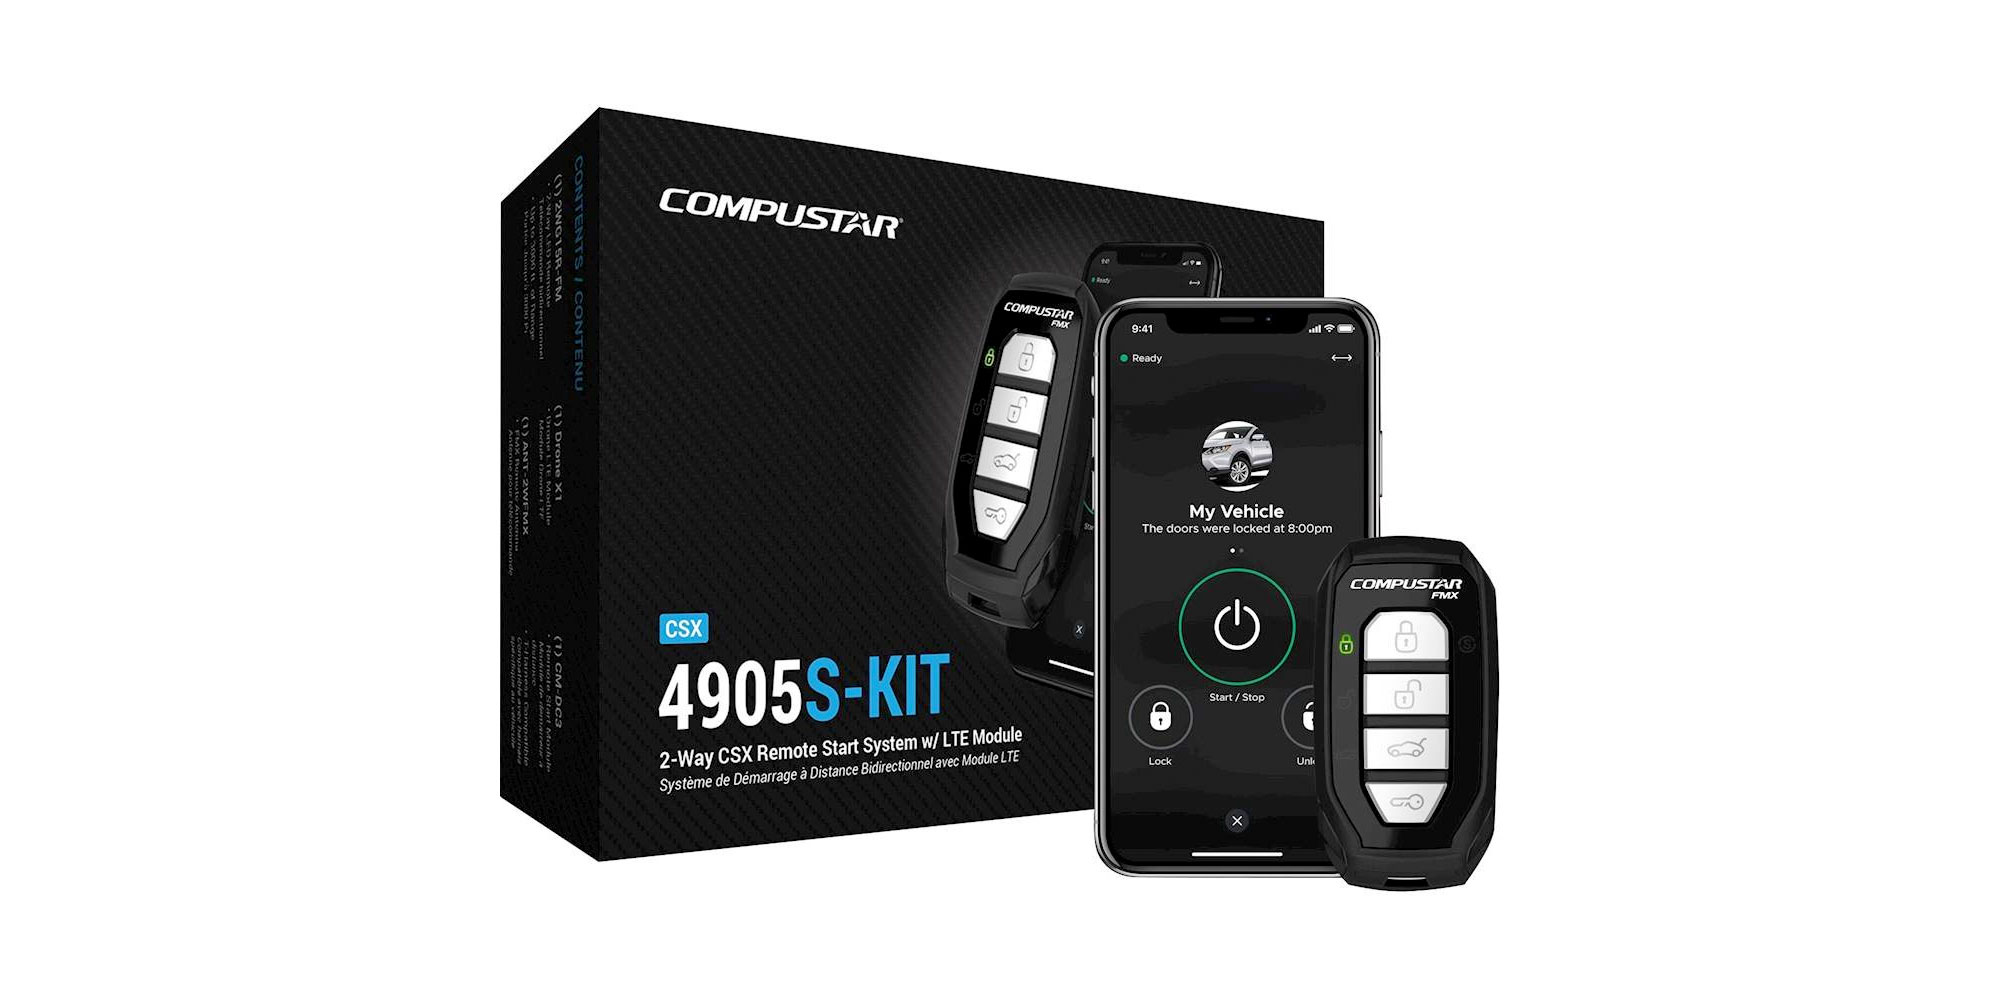 Compustar's 2-way remote start system features LTE + Install for $290